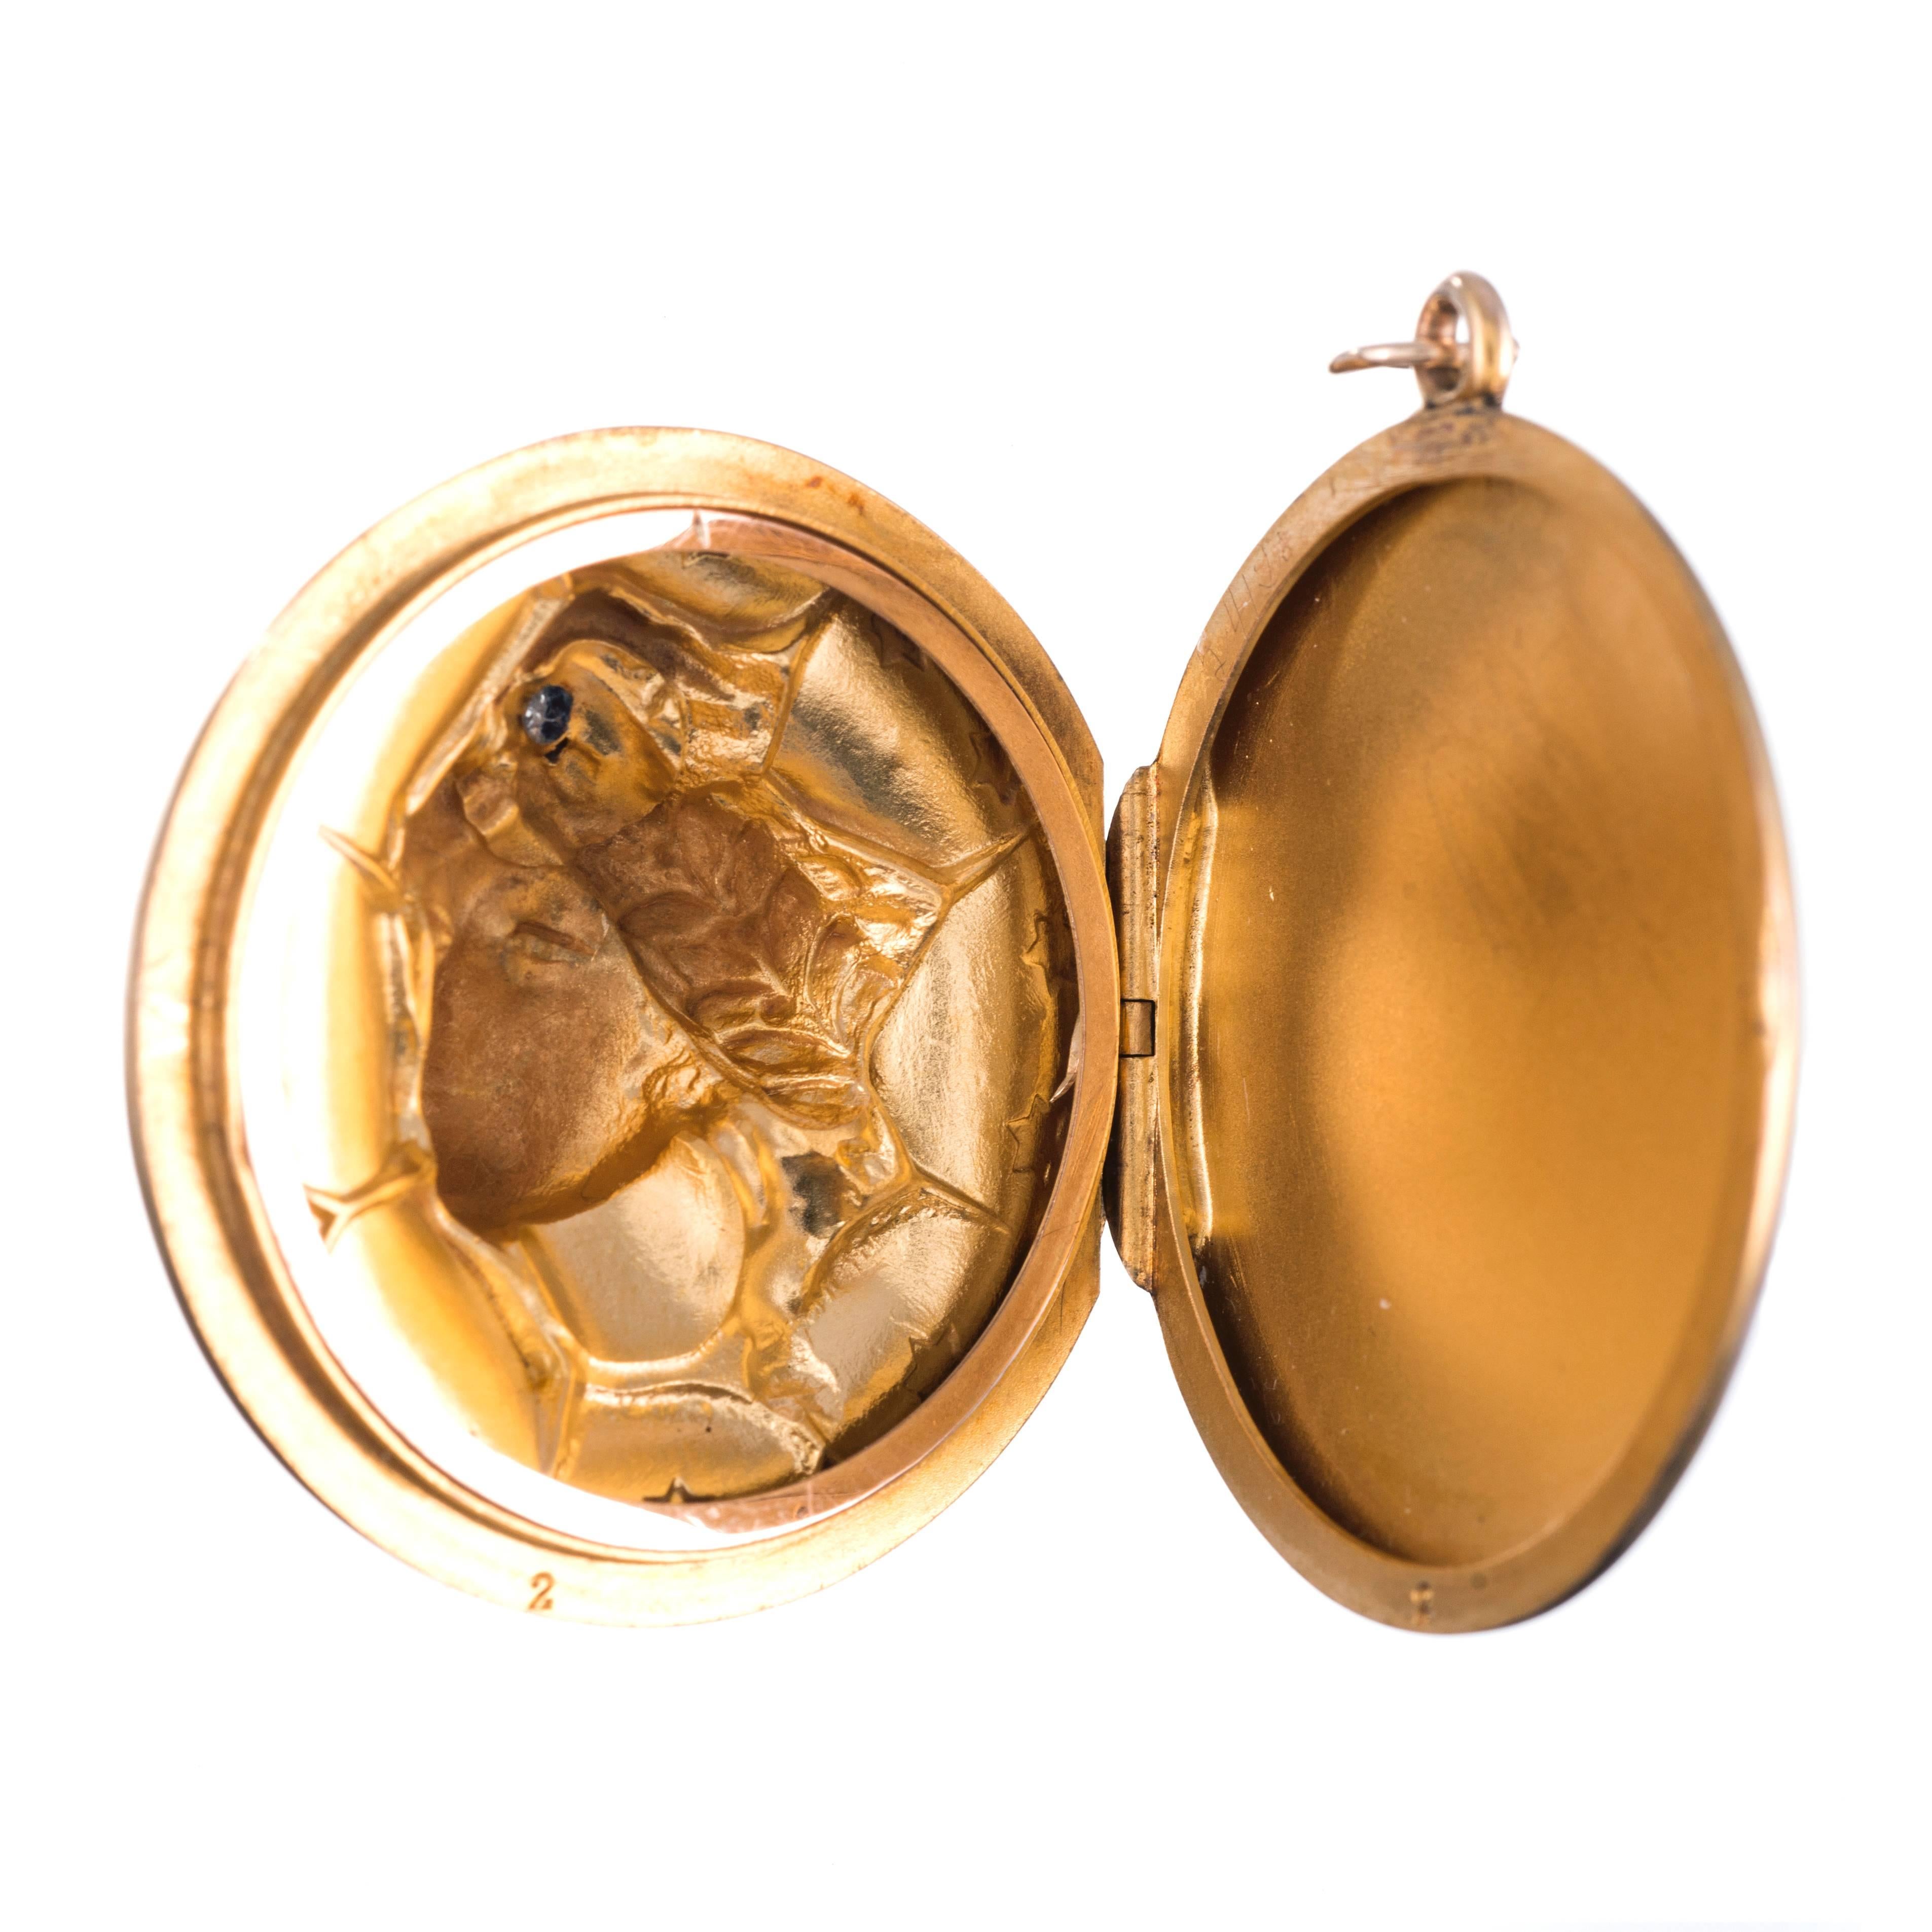 14k yellow gold original art nouveau locket, made in the US, circa 1915. The piece depicts a feminine profile, wearing a garland of leaves around her head, her forehead dotted with a diamond and framed by stars. The locket is in excellent repair,